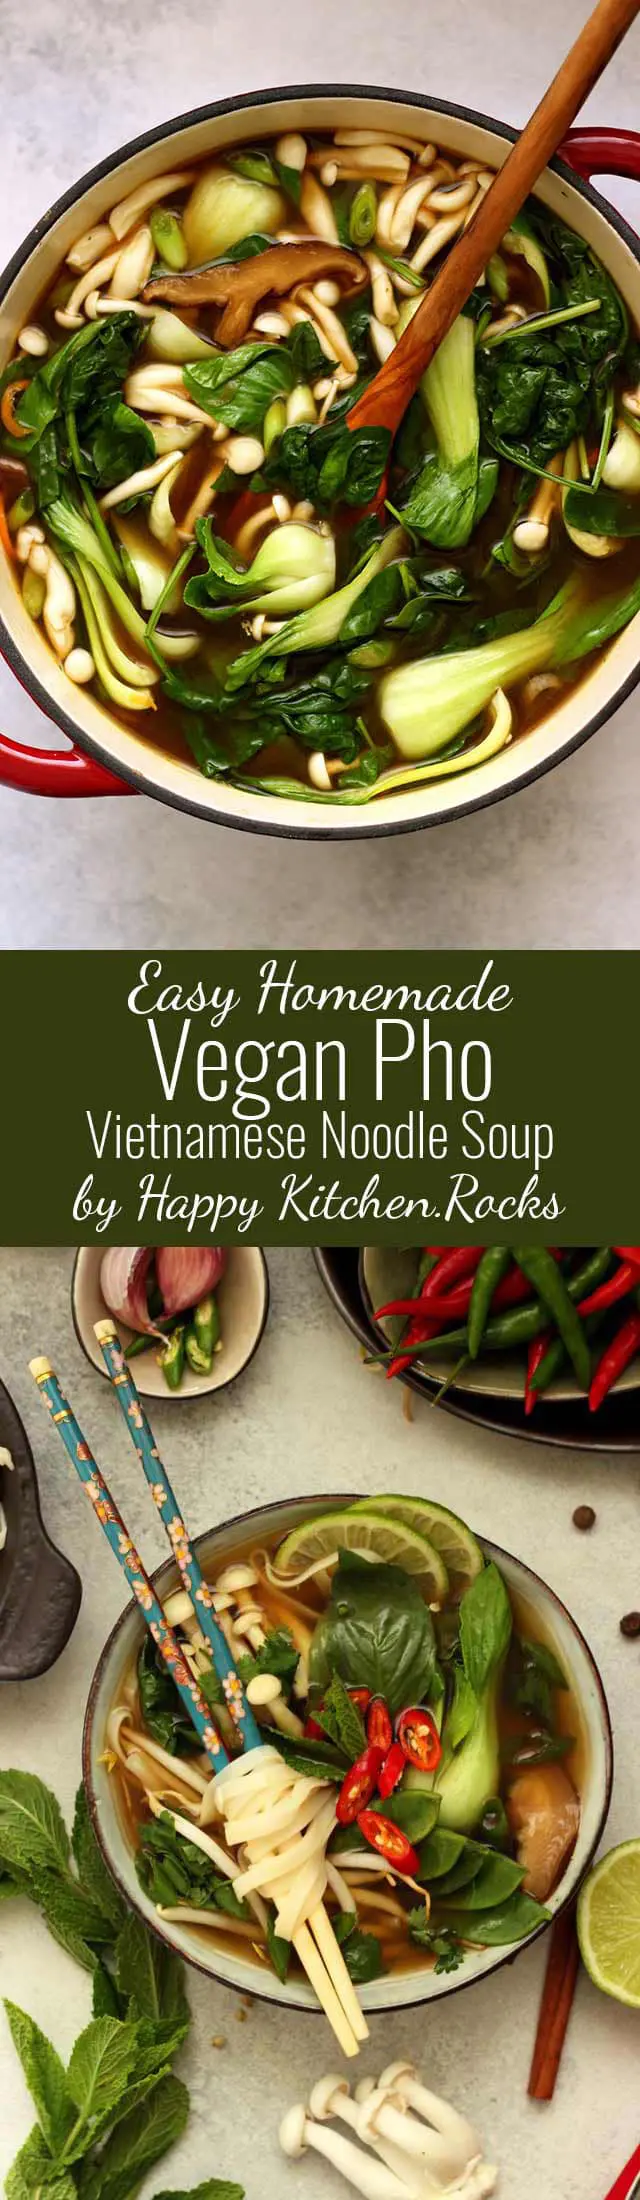 Vegan Pho (Phở) is an easier and healthier version of the traditional Vietnamese noodle soup. This nourishing and flavorful gluten-free and fat-free soup is perfect for any season! #asian #pho #noodlesoup #broth #vietnamese #vegan #vegansoup #veganrecipe #veganfood #comfortfood #recipe #recipes #glutenfree #plantbased #vegetarian #healthyeating #healthyfood #noodlebowl #asianfood